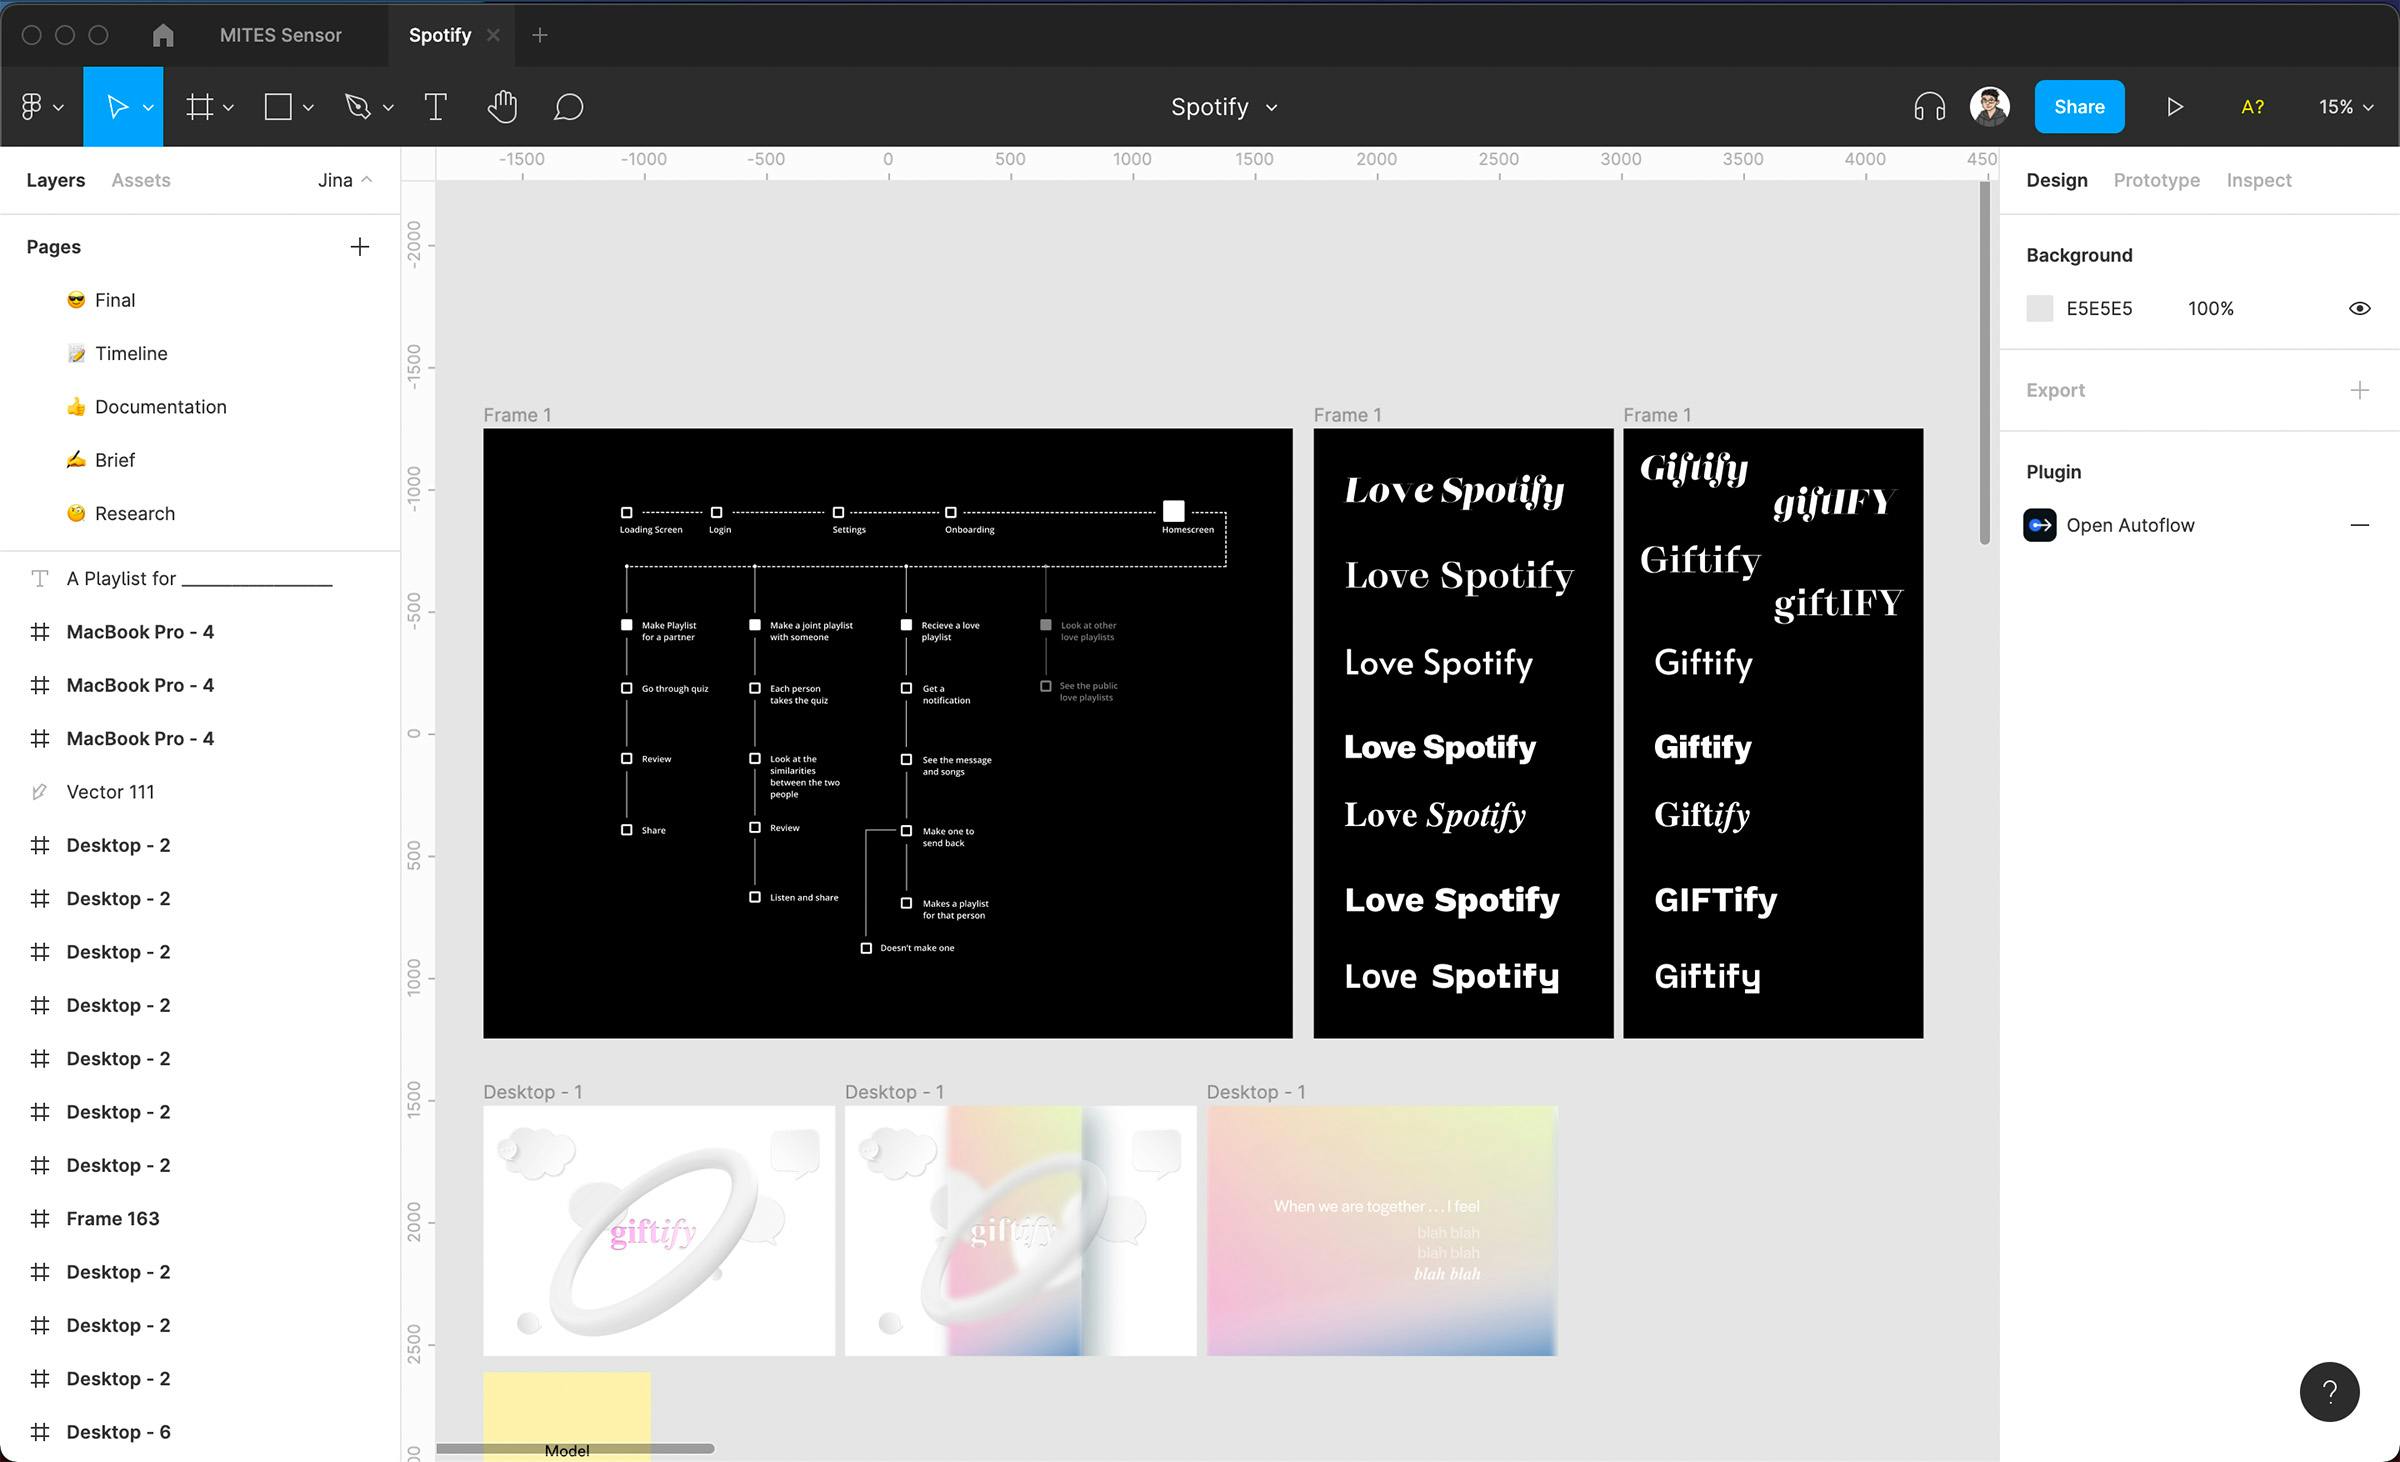 A Figma board exploring typefaces, color treatment, and the overall feel of the site.